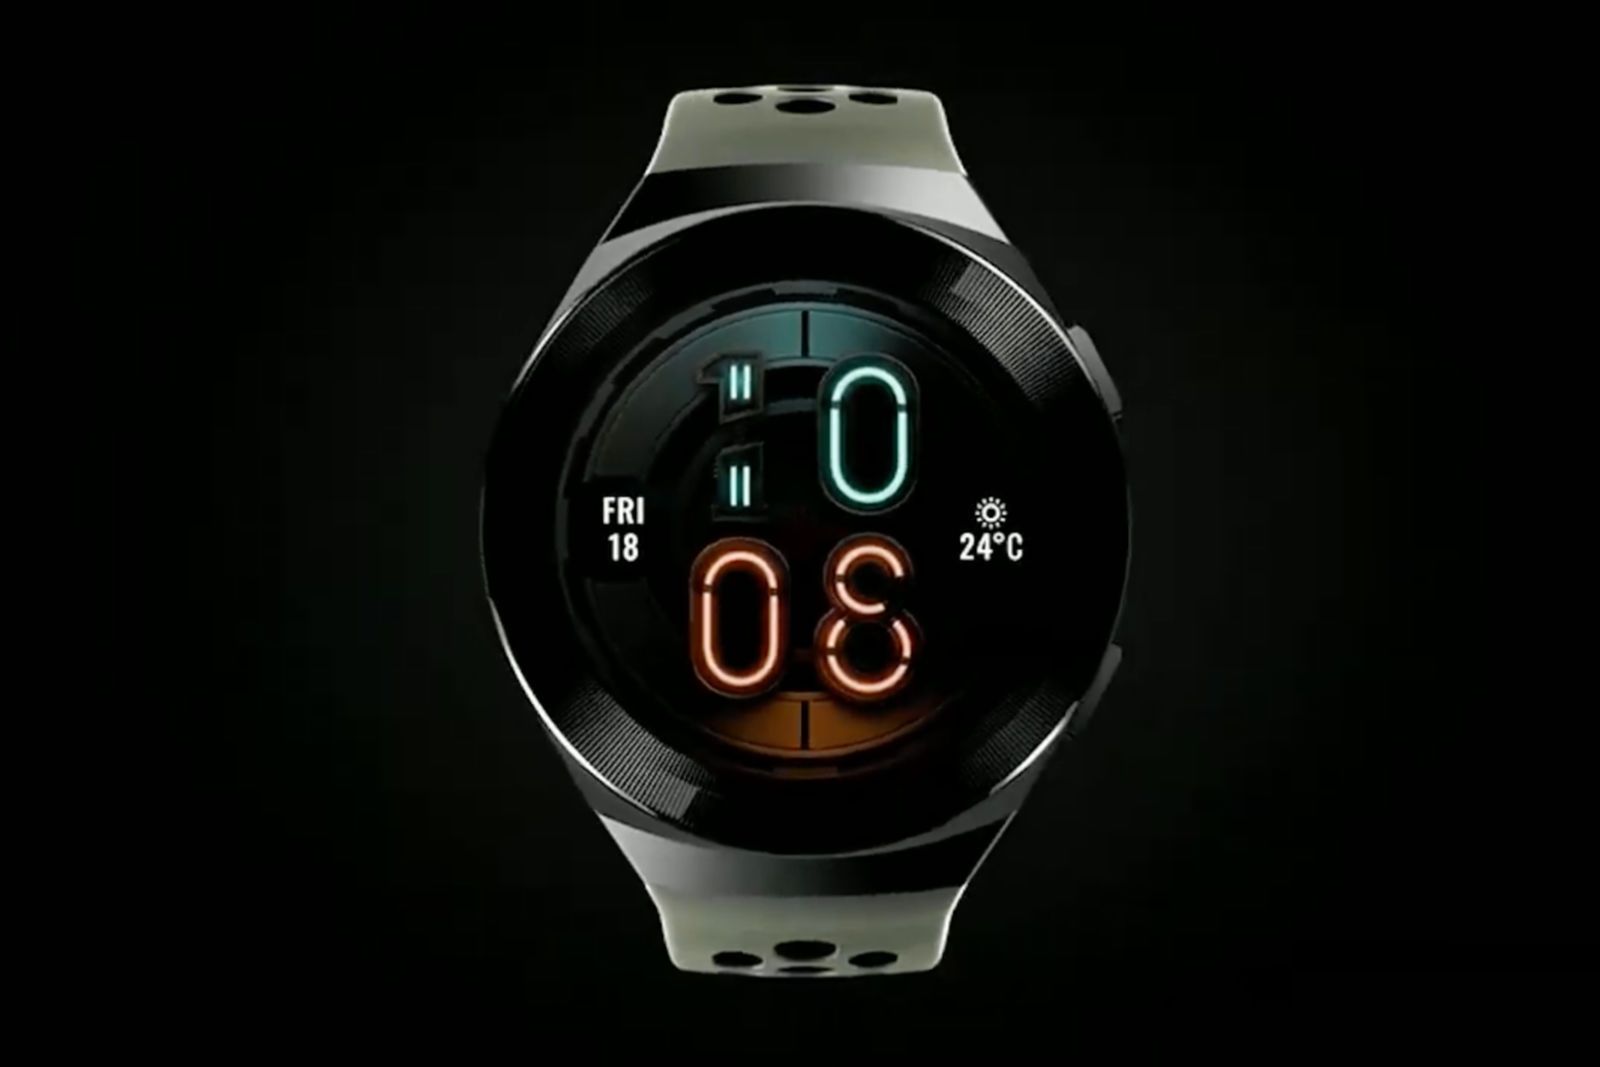 Huawei adds more sporty Watch GT 2e to its smartwatch range image 1